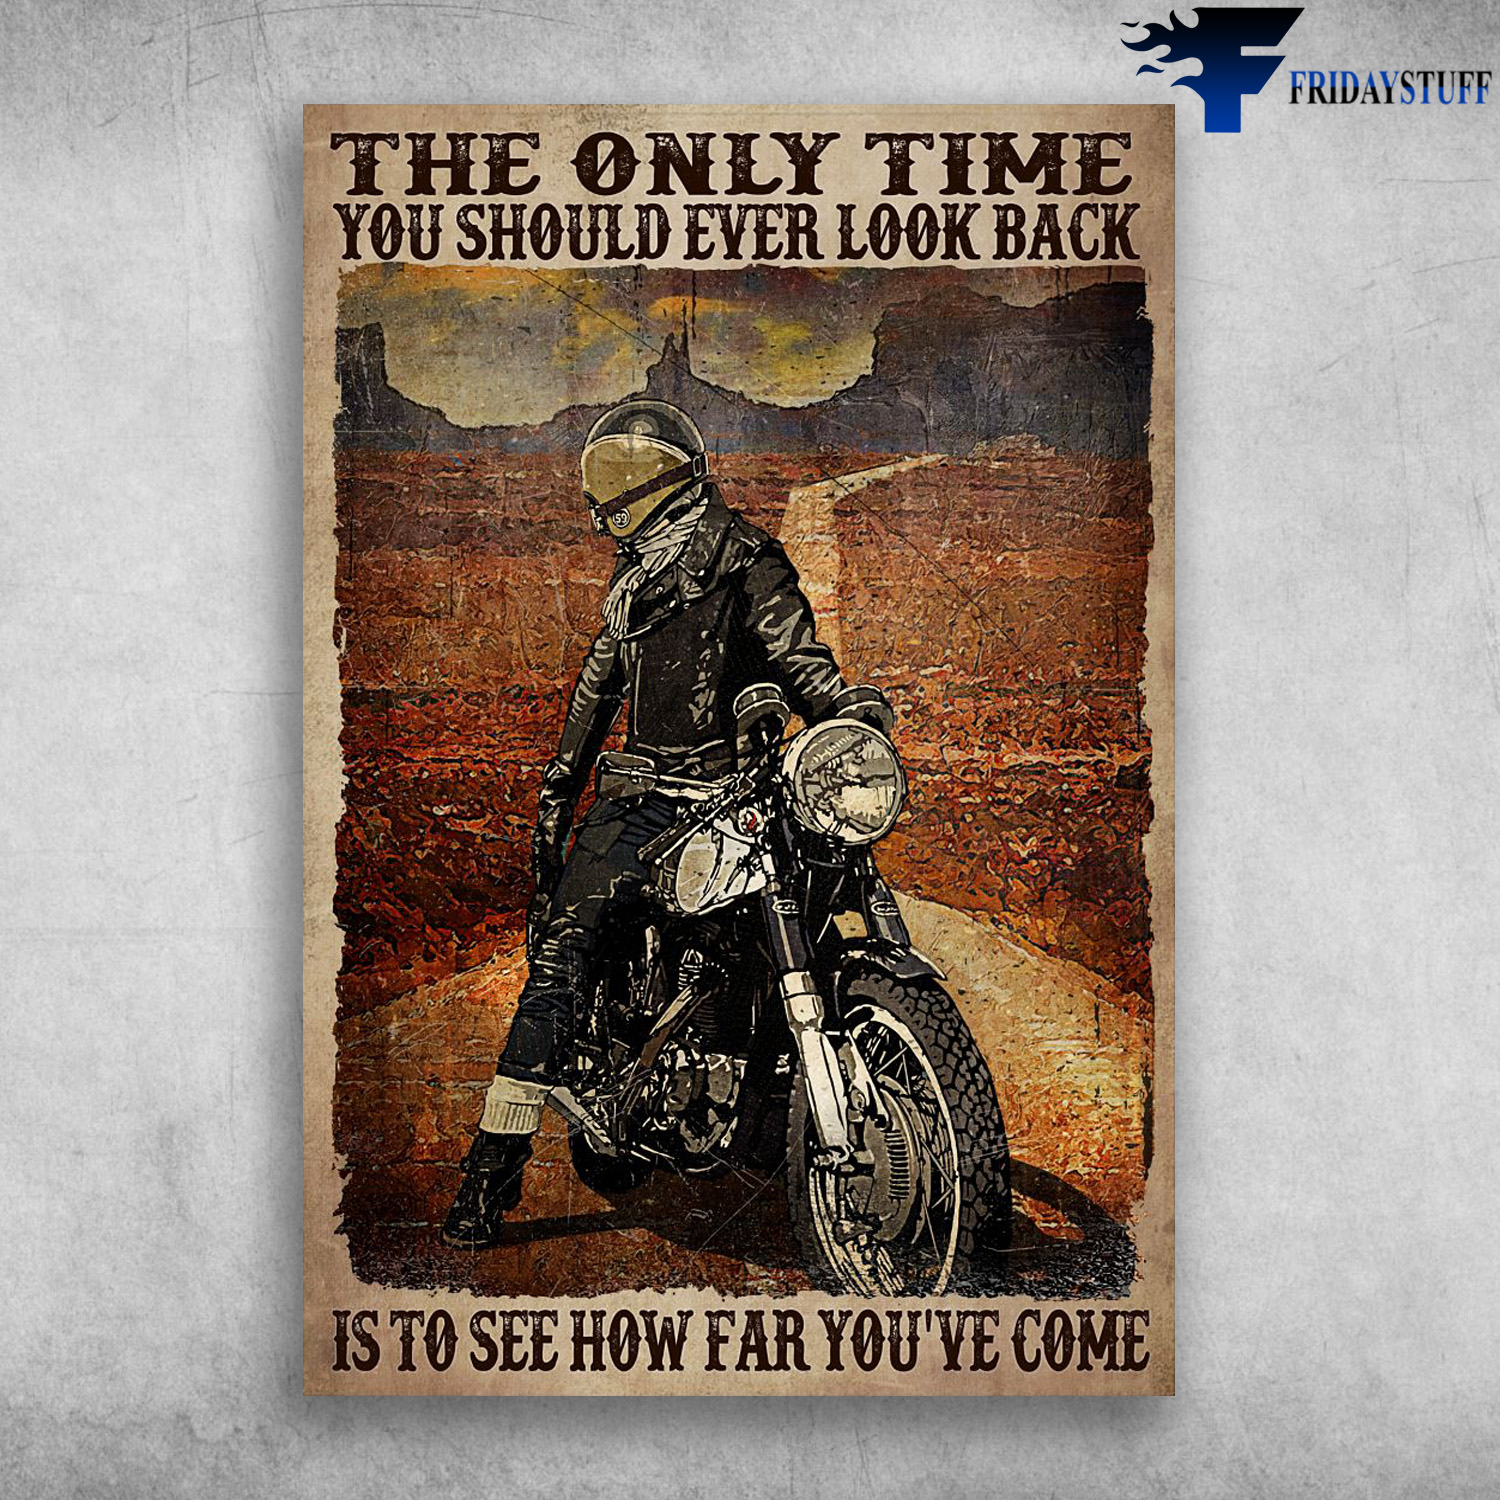 Motorcycle Man - The Only Time You Should Ever Look Back, Is To See How Far You've Come, Motorbike, Biker